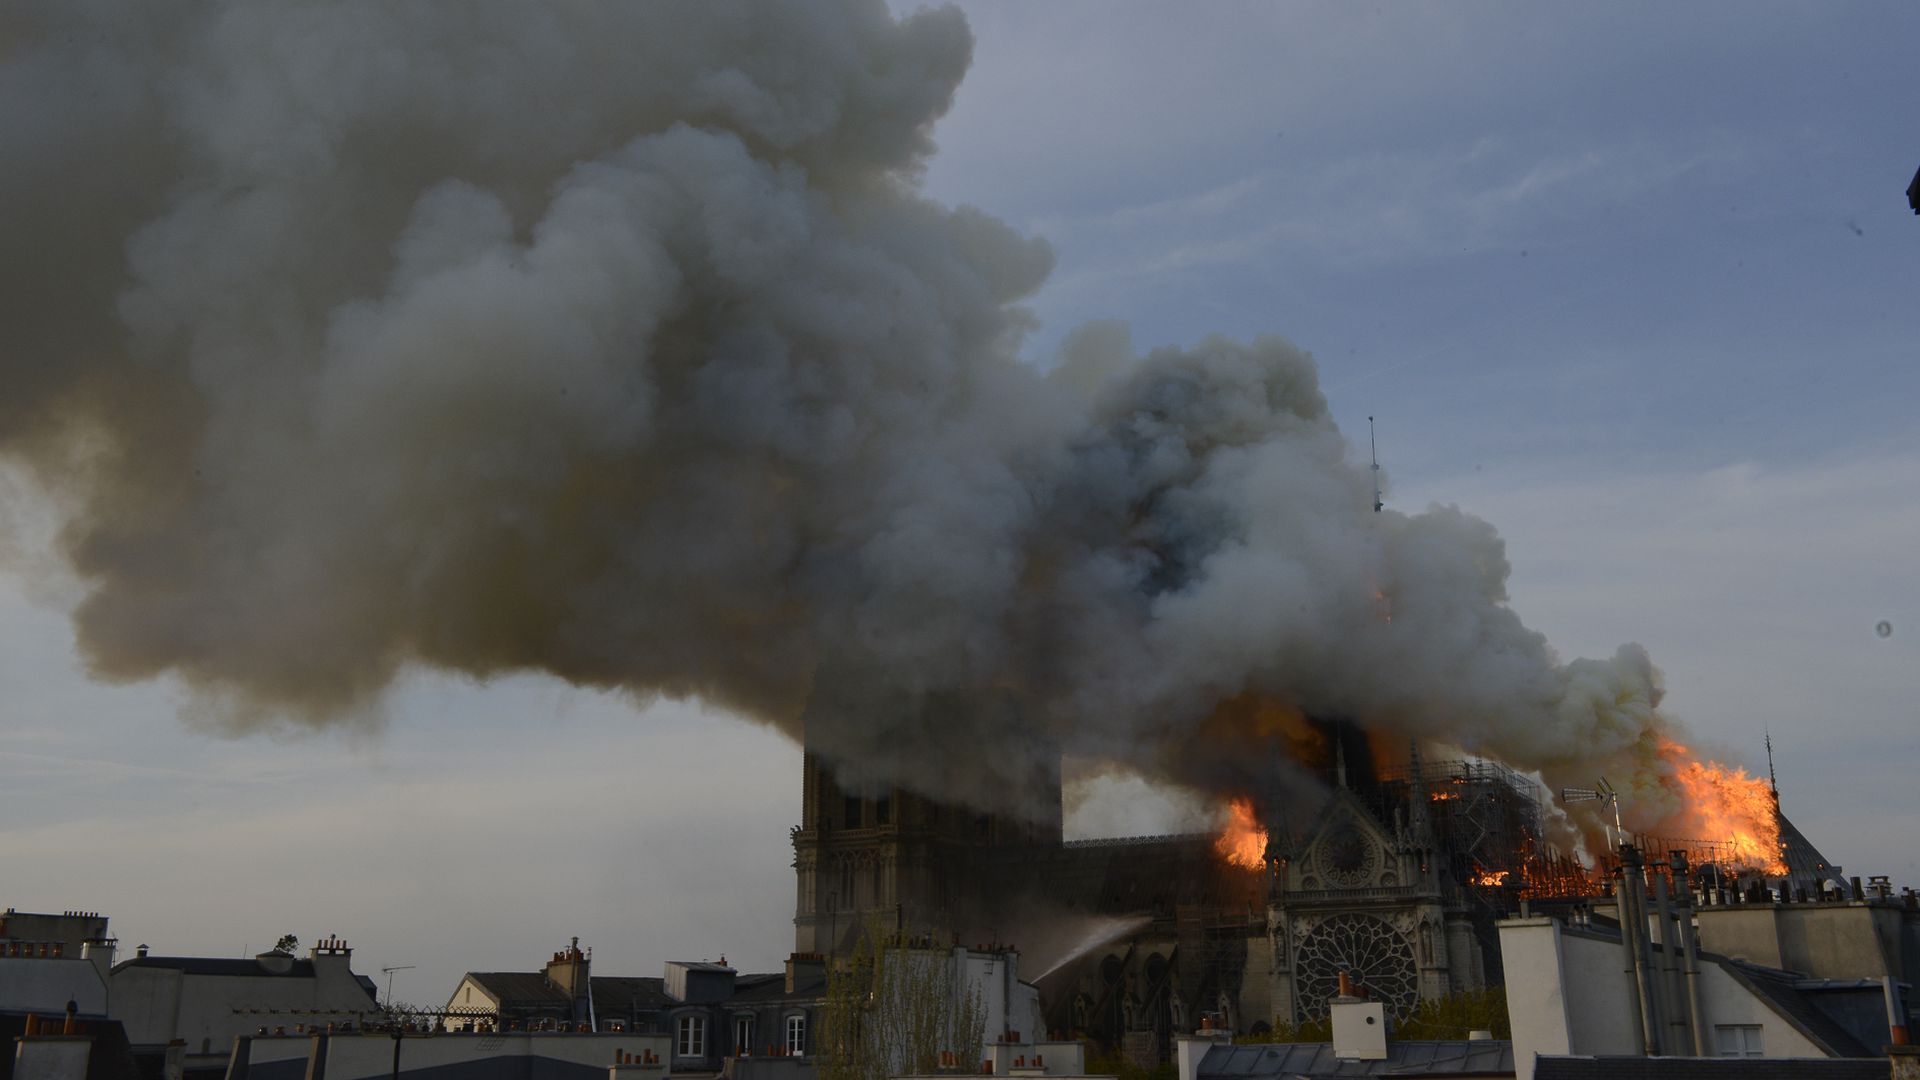 An image of the fire at Notre Dame in Paris